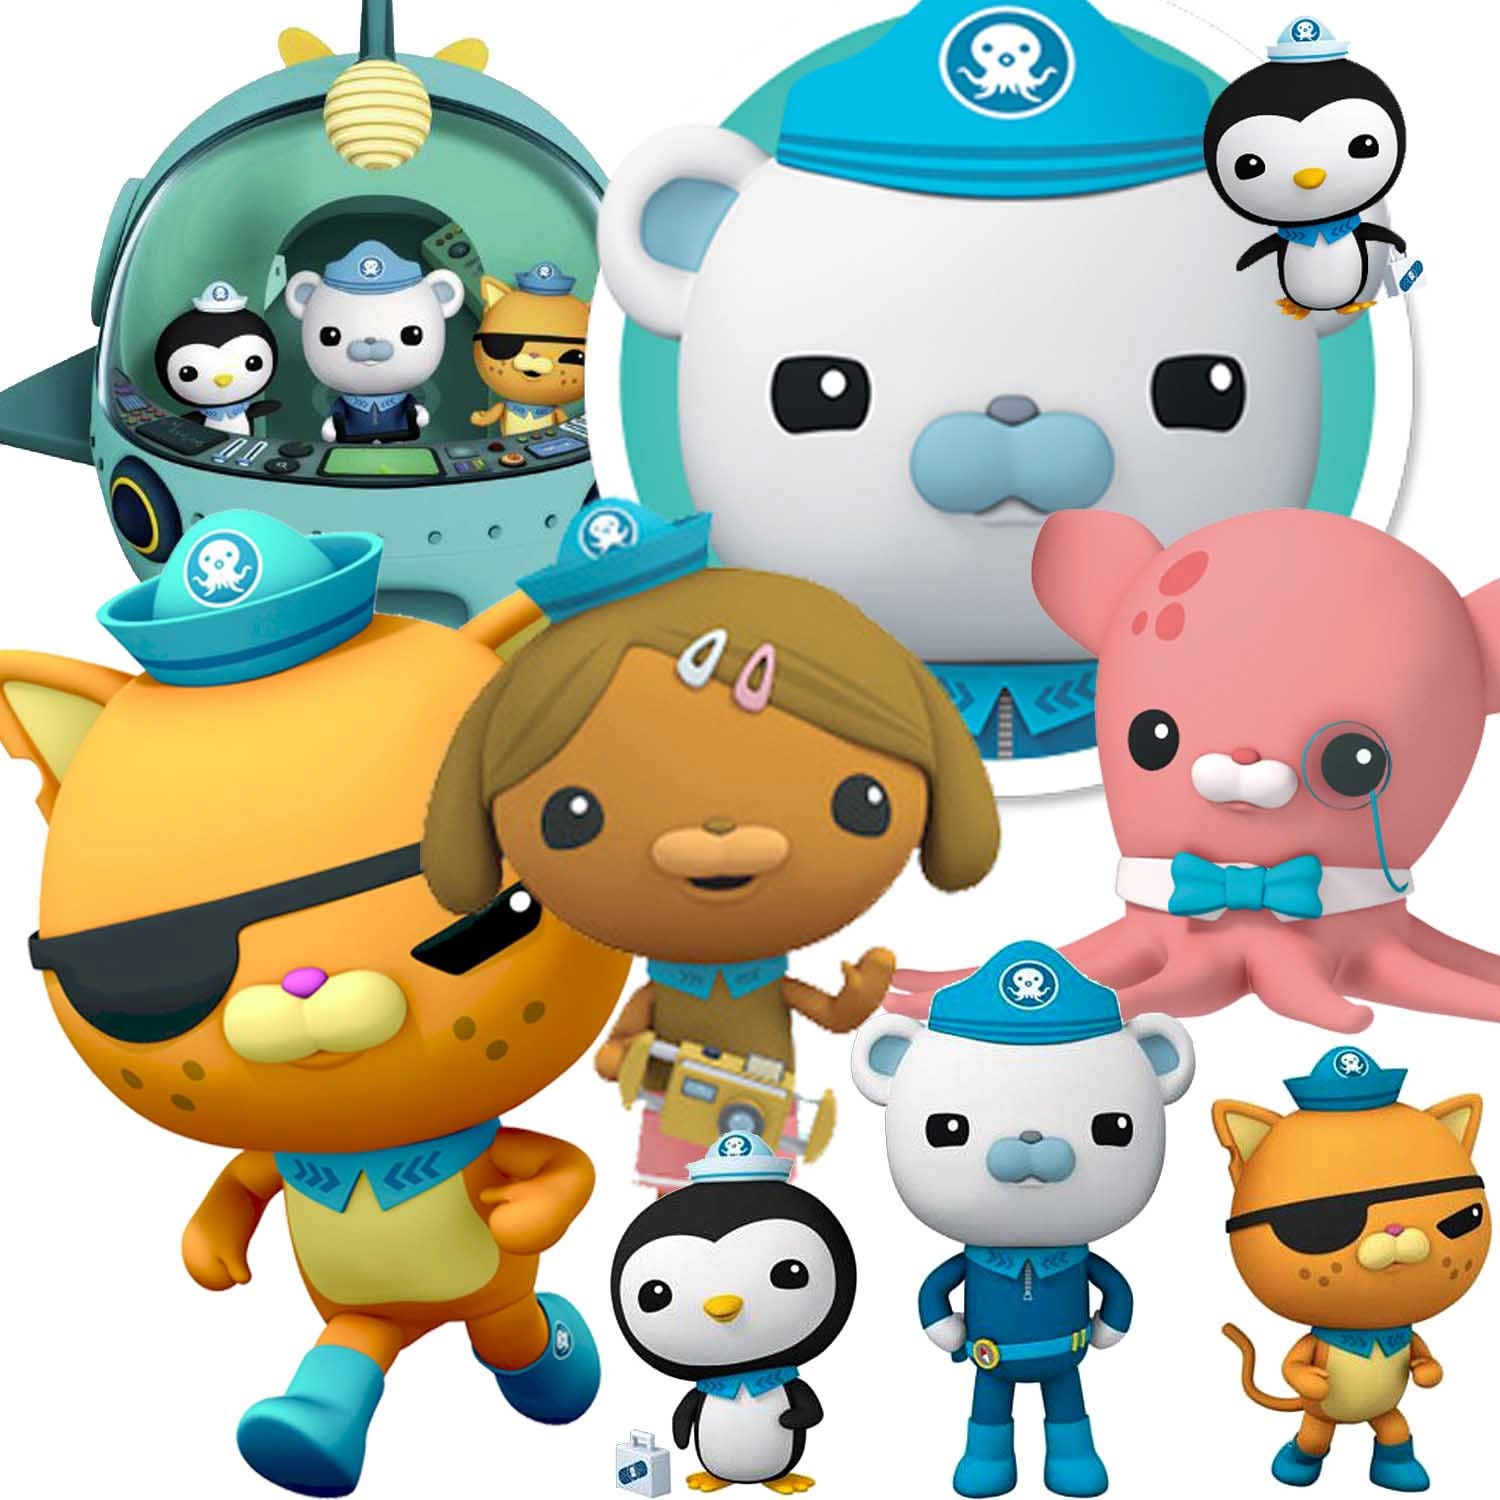 Octonauts Themed Digital Scrapbooking Background Papers - 12x12 300 ppi ...